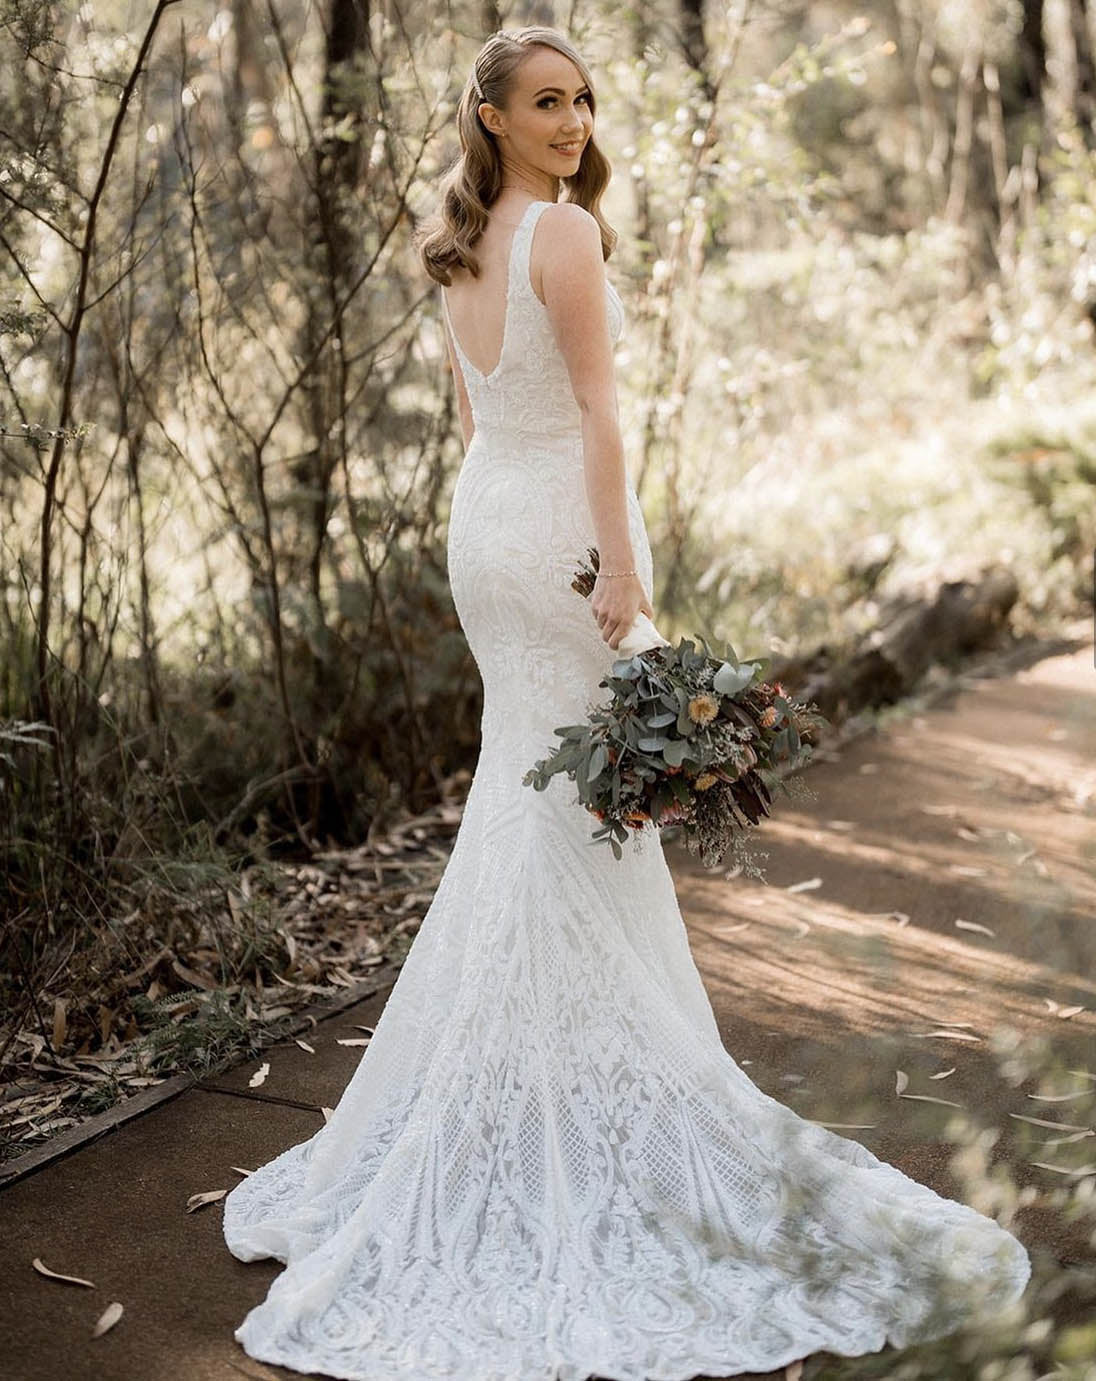 Elegant A Line Bridal Gown With Sheer Neckline, Long Puff Sleeves, And  Illusion Back From Dress_1st, $175.88 | DHgate.Com